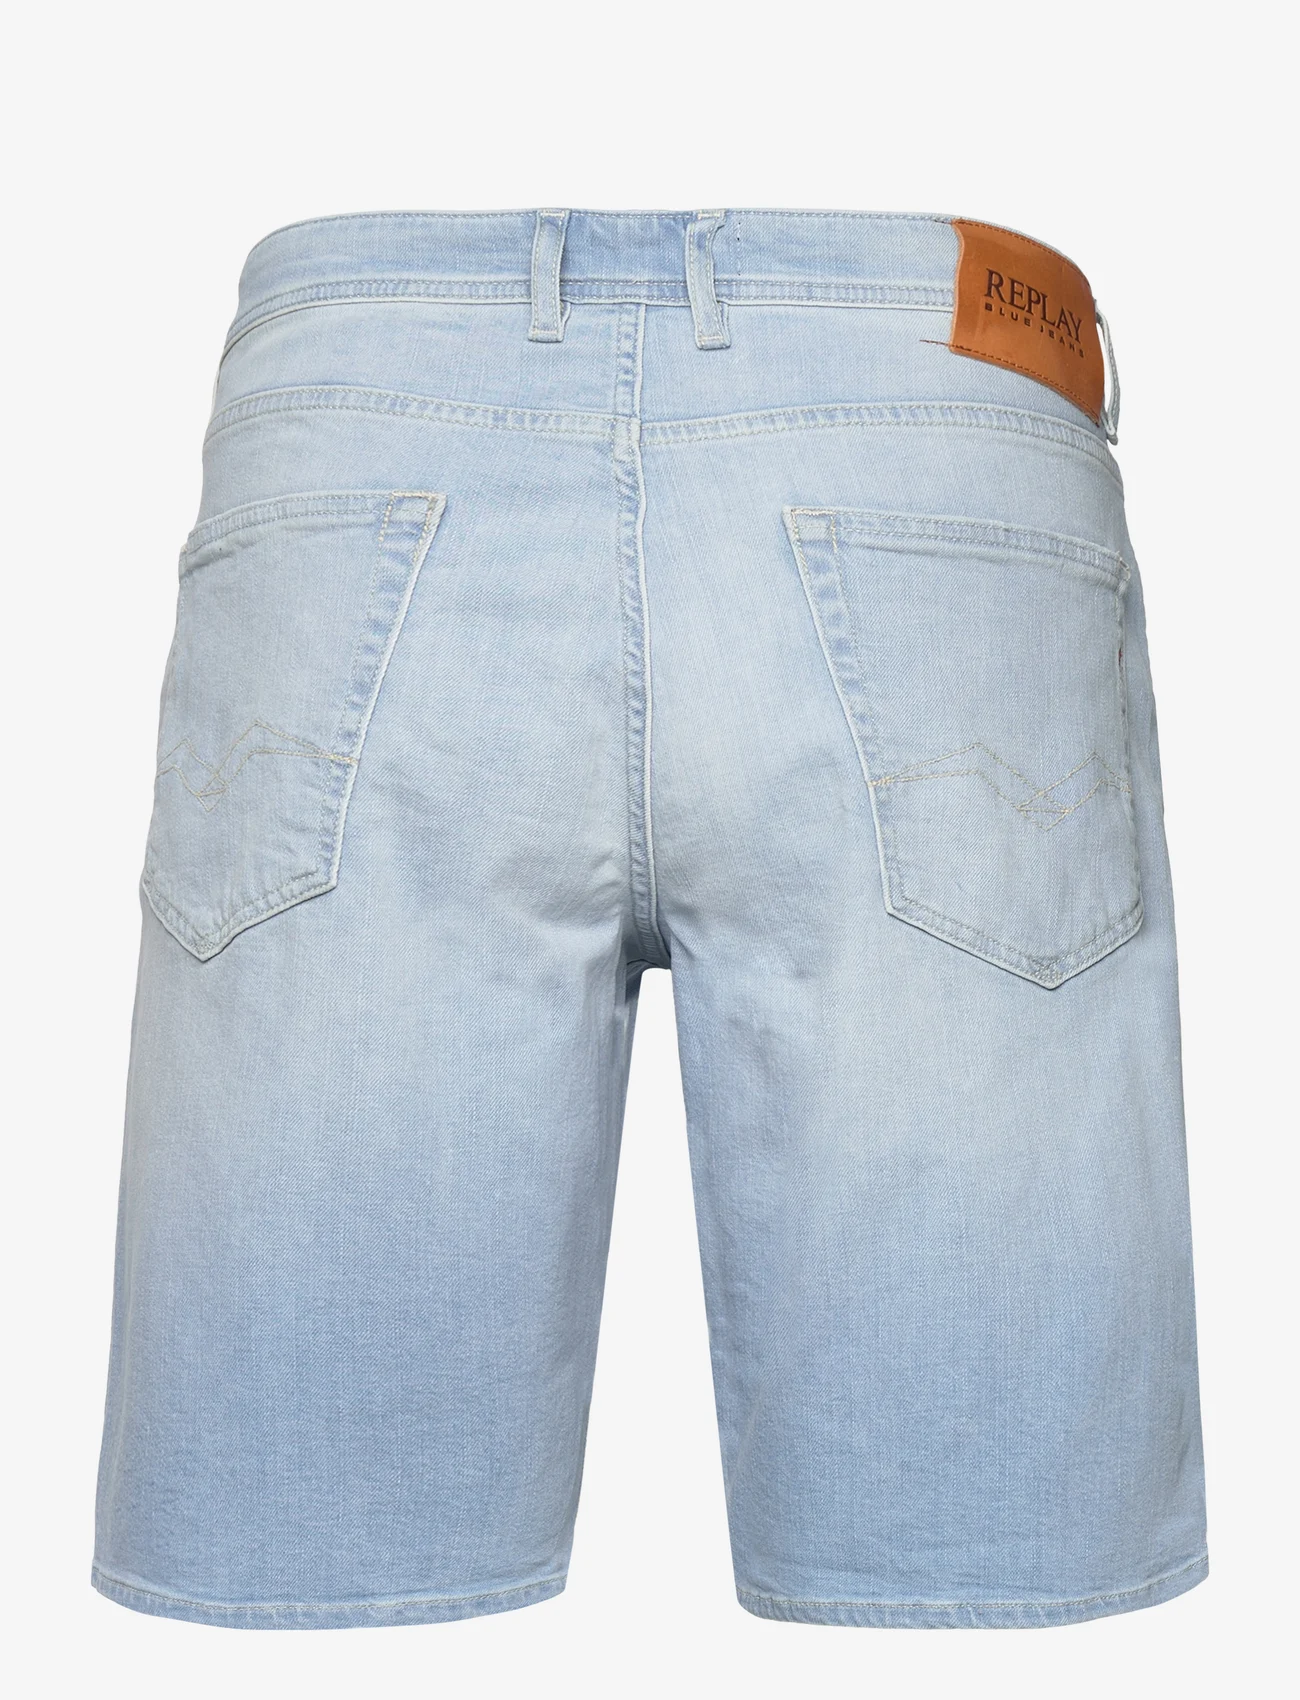 Replay - GROVER SHORT Shorts STRAIGHT 573 ONLINE - jeans shorts - blue - 1